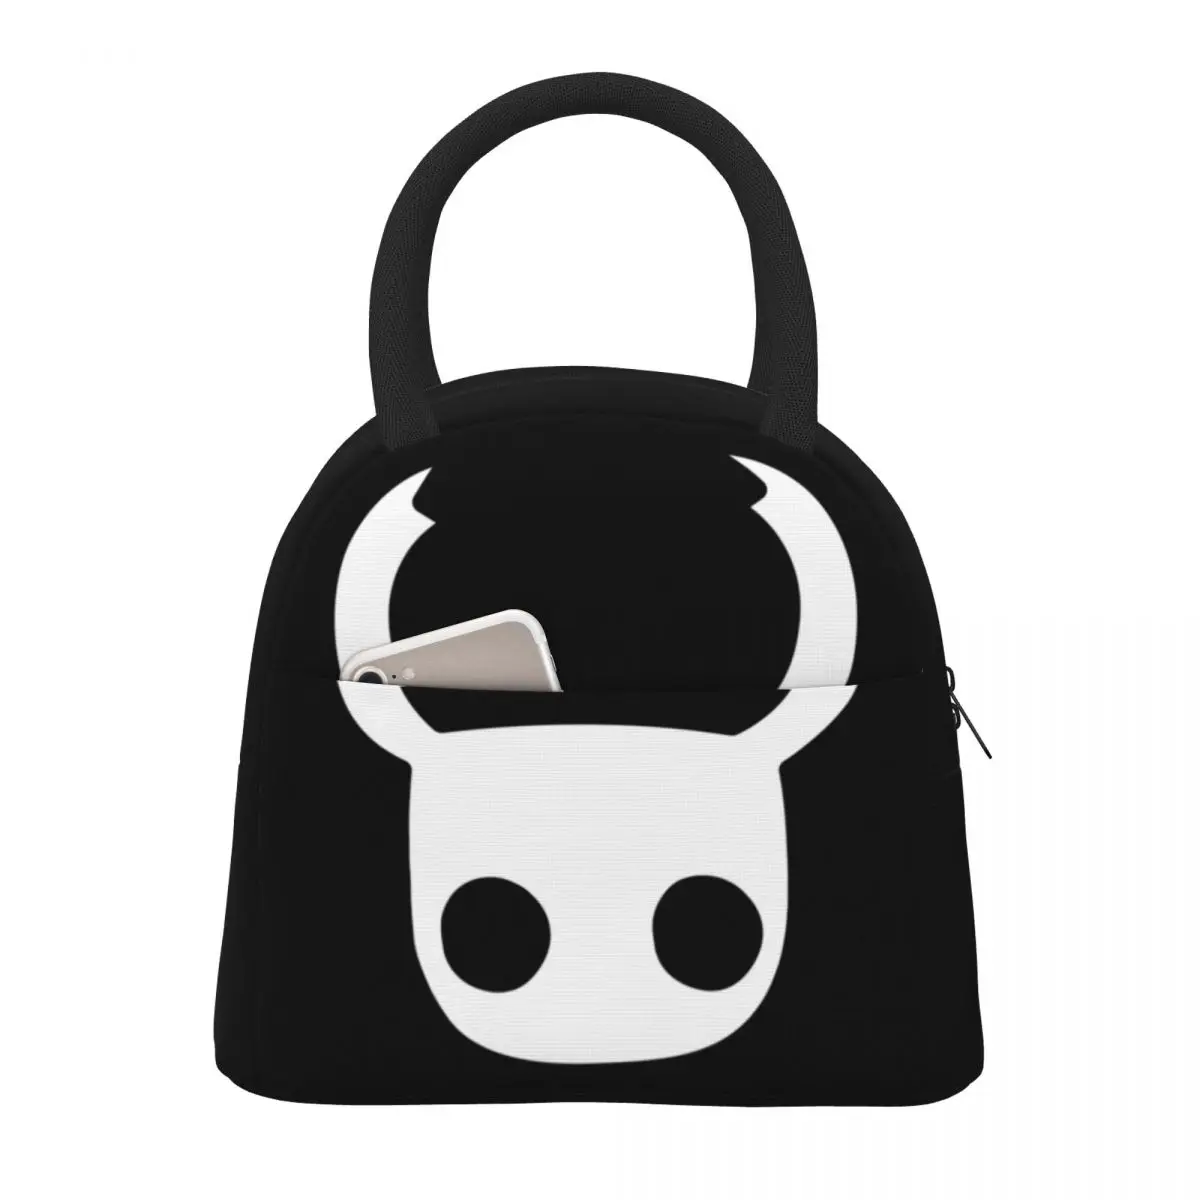 Lunch Bag for Men Women Hollow Knight Insulated Cooler Portable Picnic Skull Video Game Oxford Tote Handbags